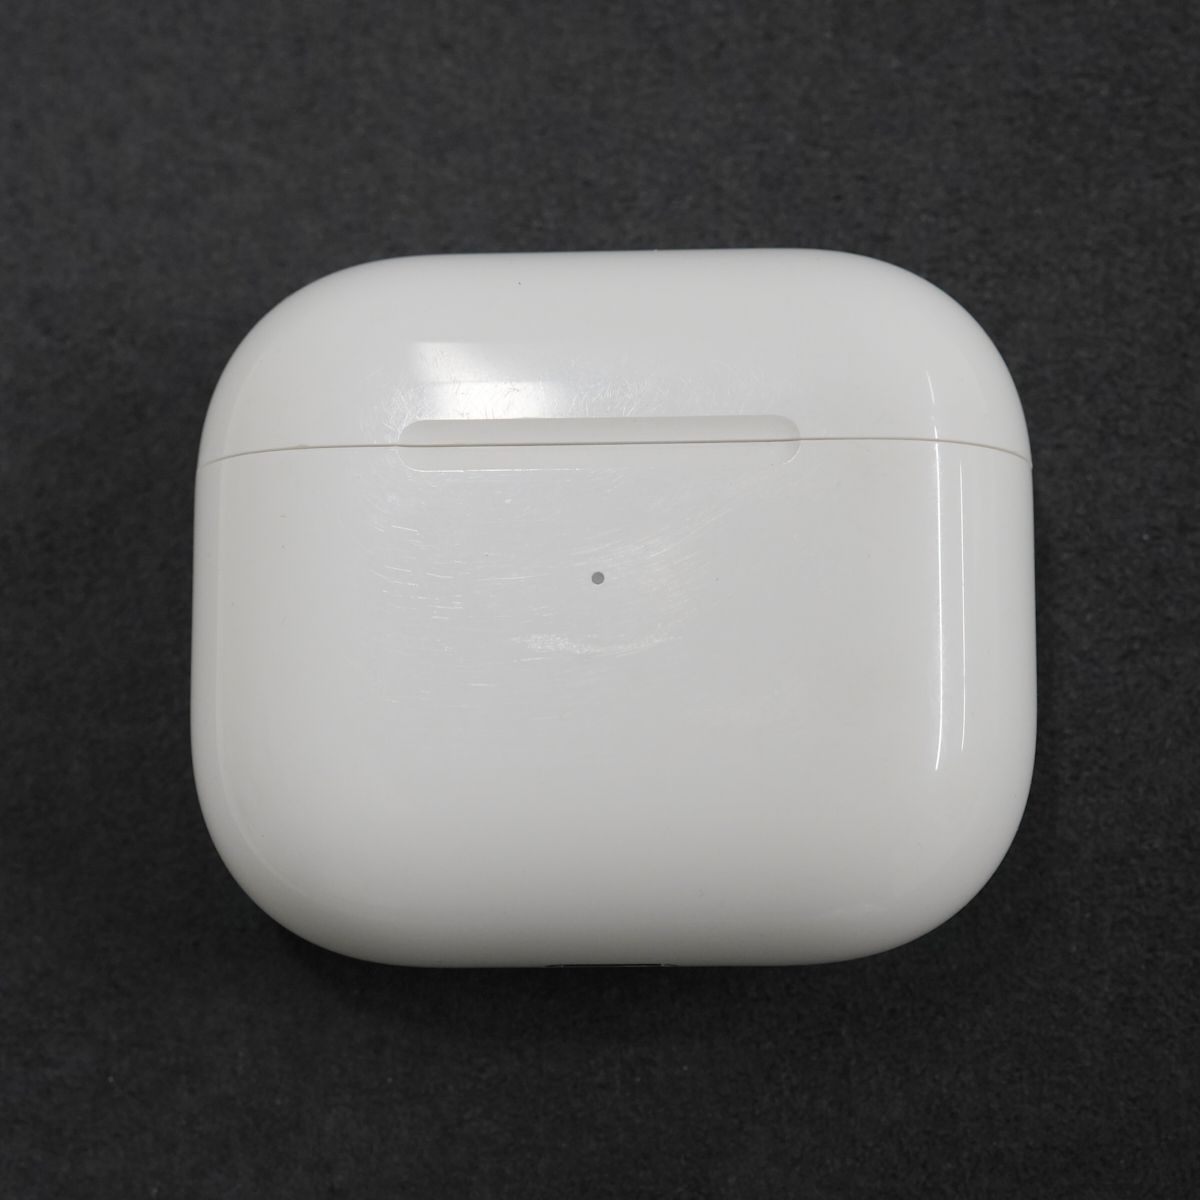 Apple AirPods third generation MagSafe charge case attaching USED super-beauty goods wireless earphone enduring sweat water-proof MME73J/A working properly goods K V9449